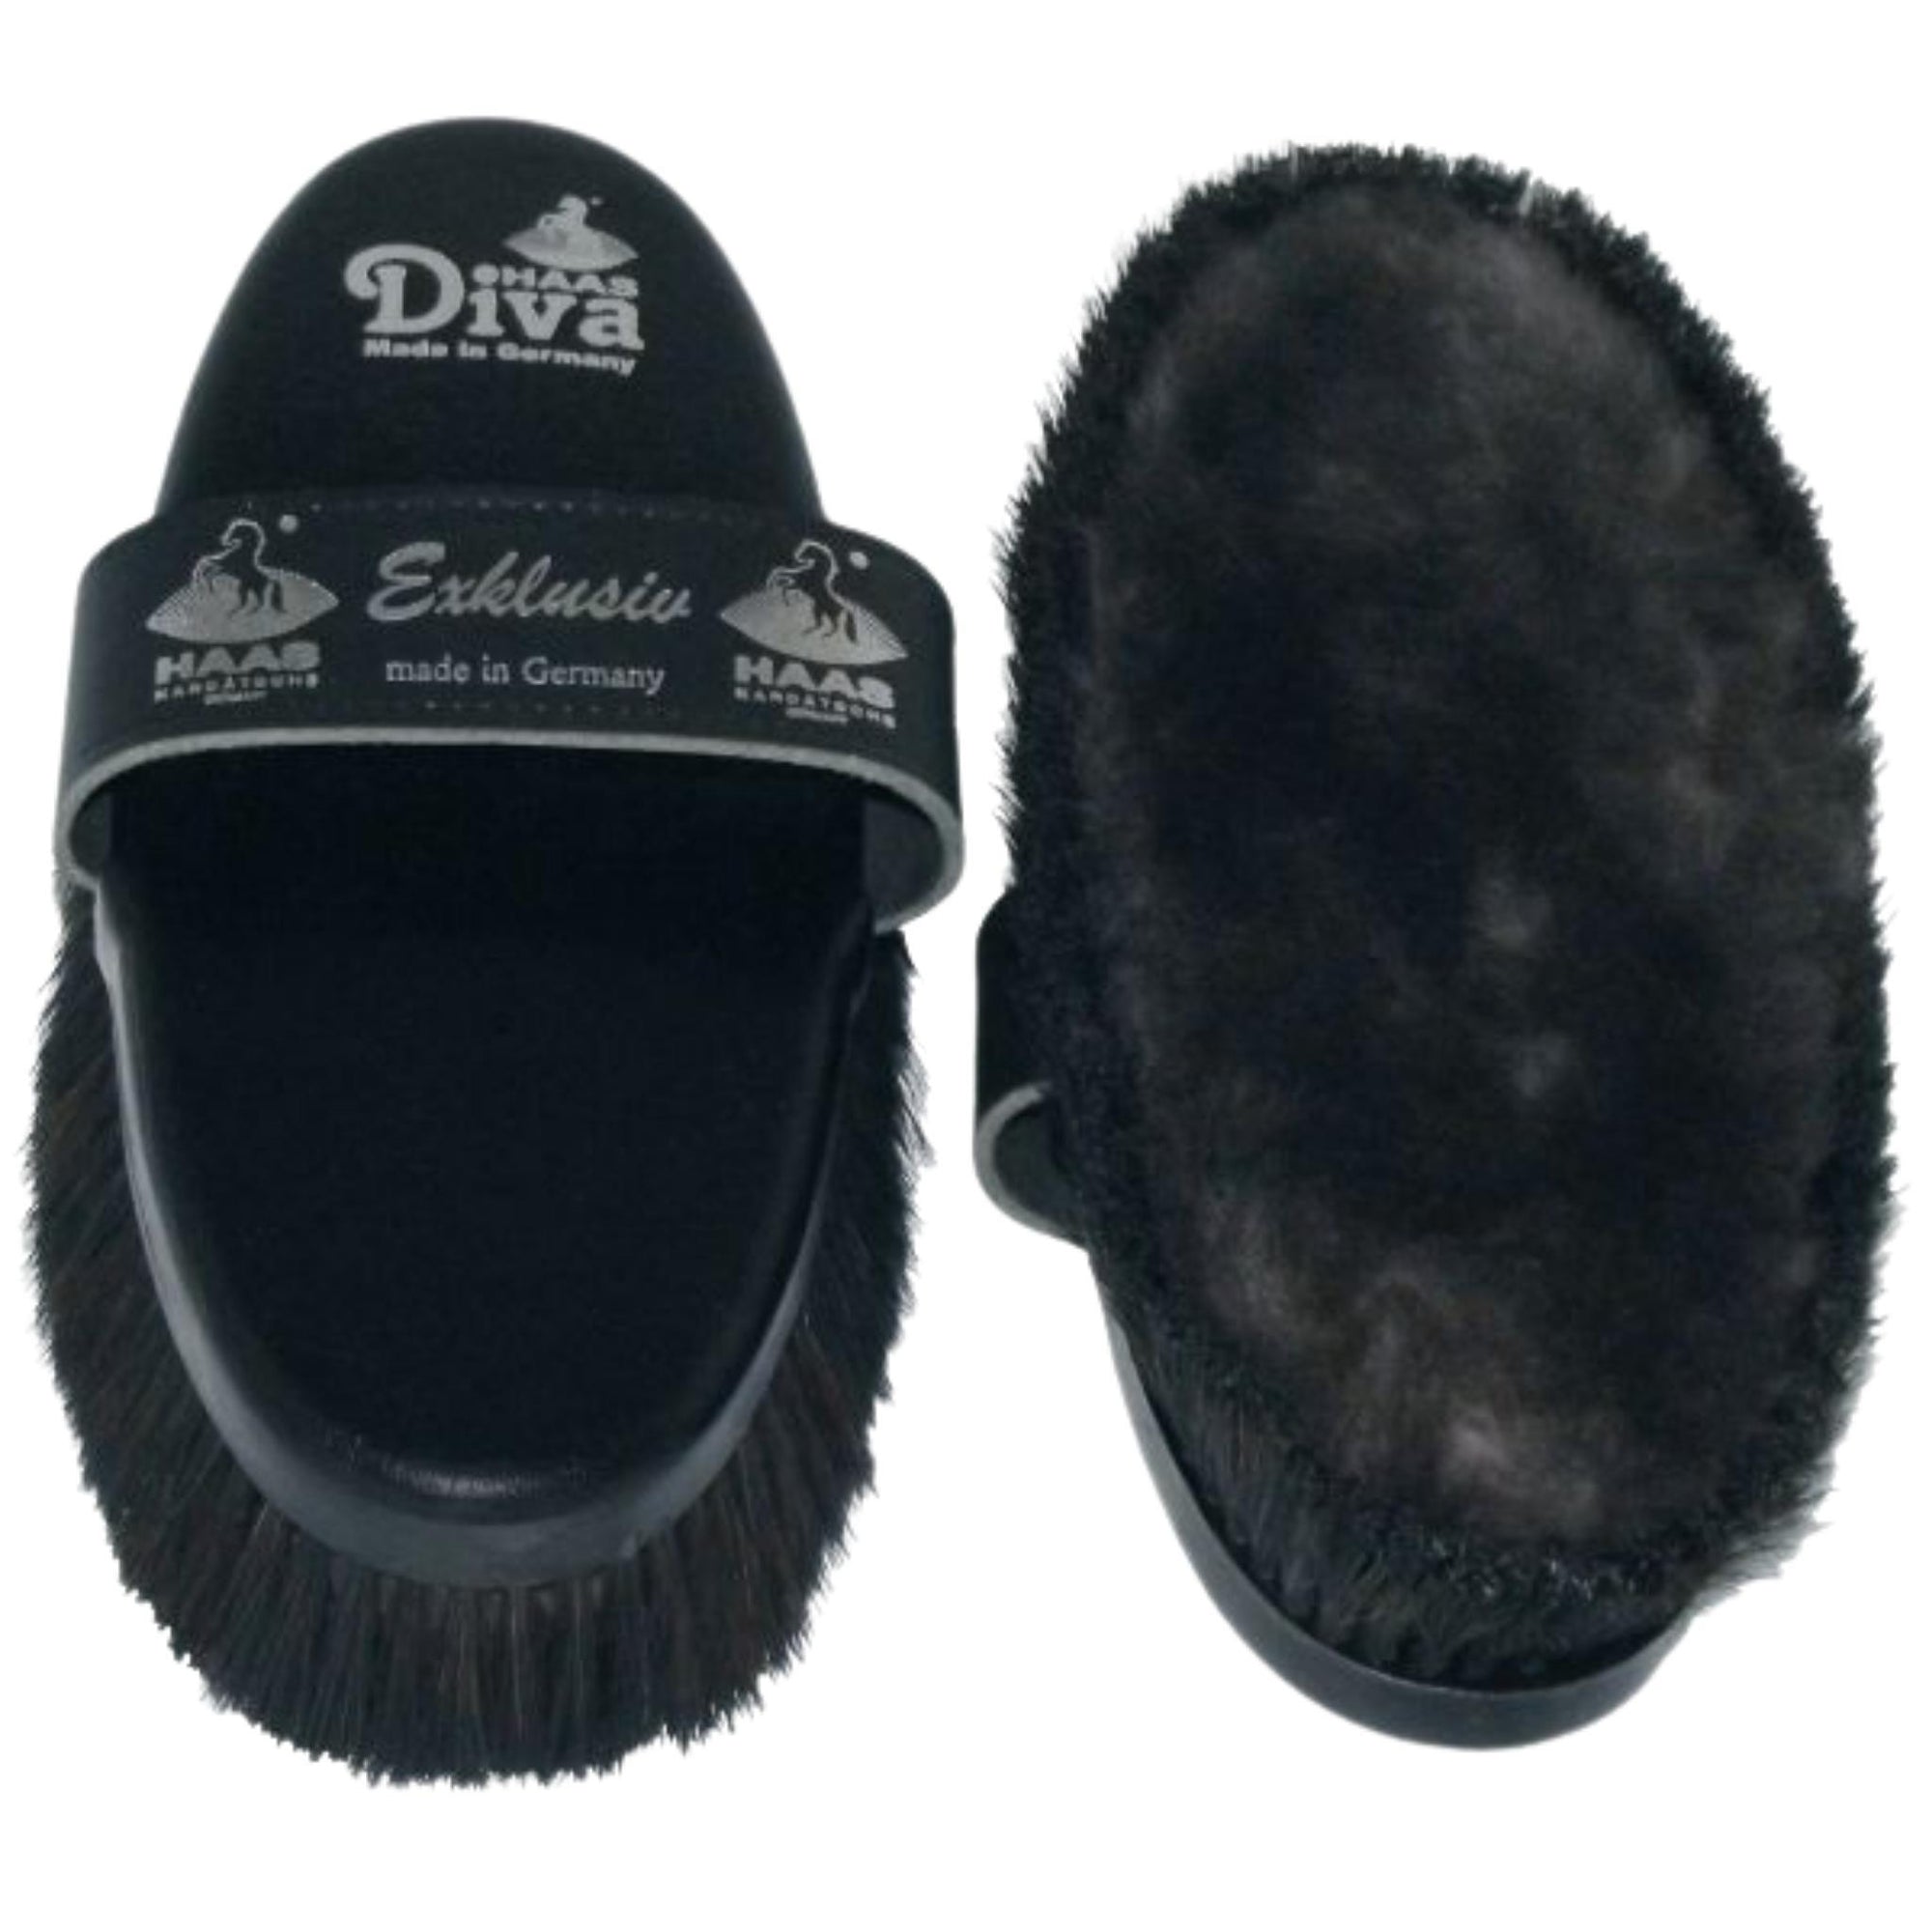 Black brush with leather hand strap, velvety lamb wool middle and bristles.